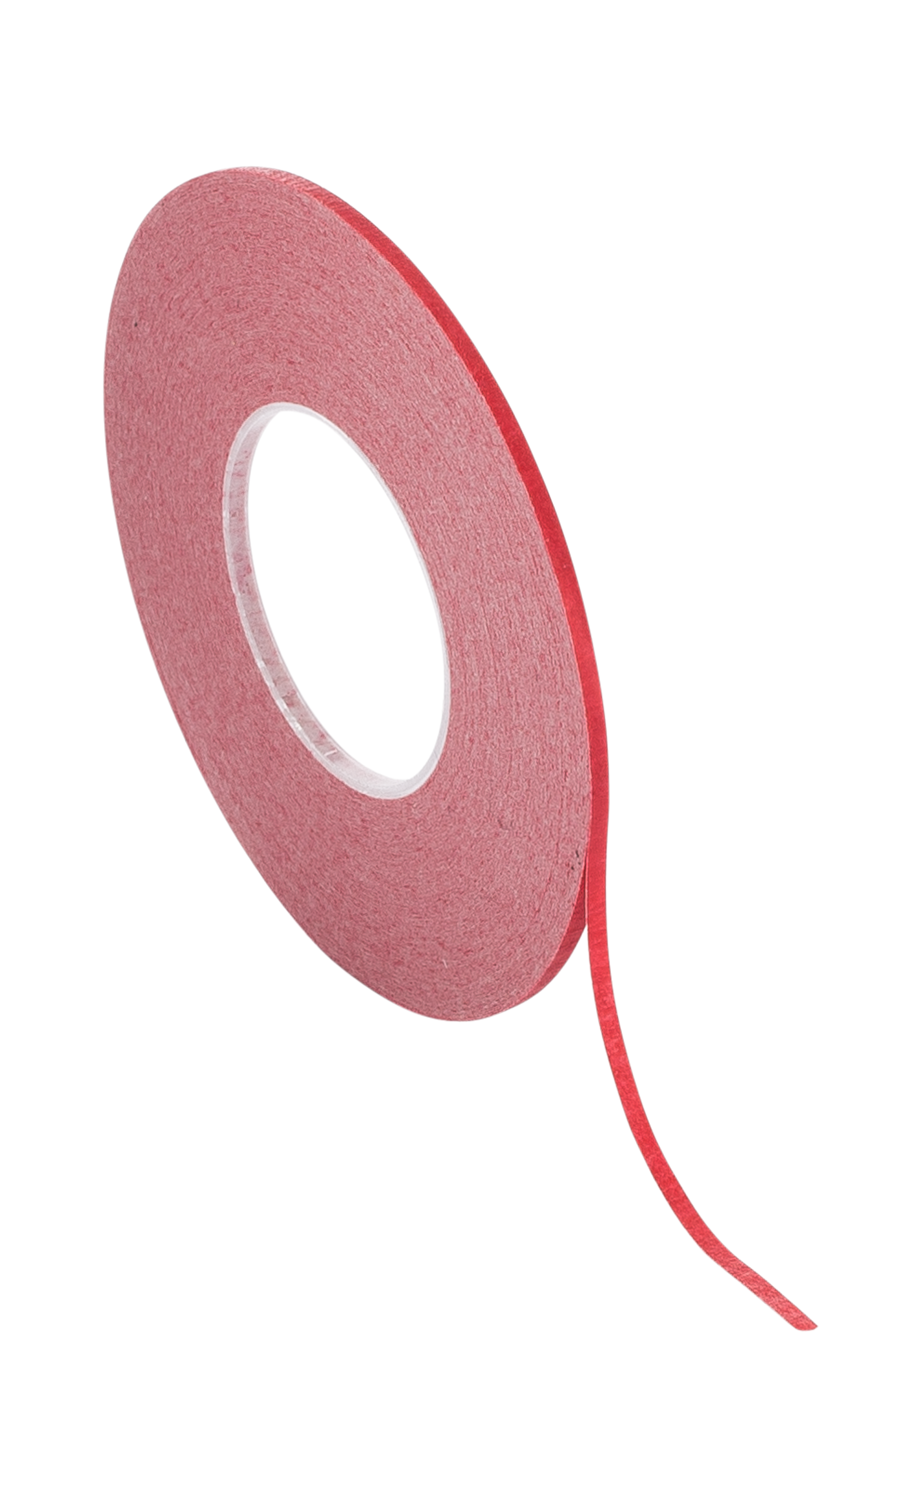 1/16" x 648" Red Crepe Tape